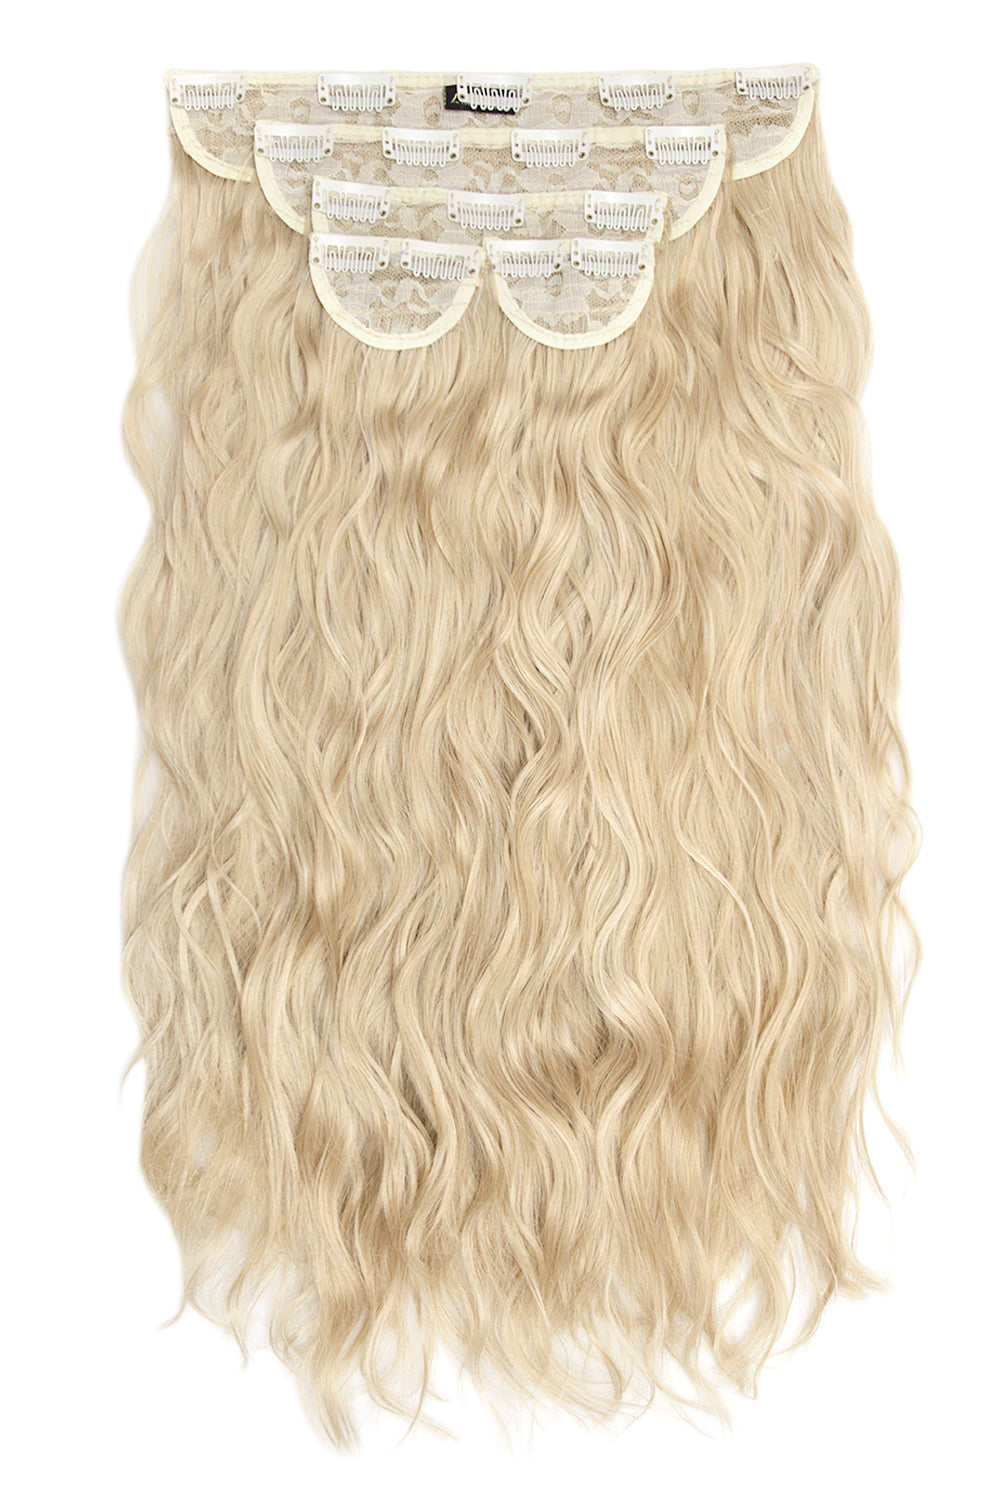 Super Thick 22" 5 Piece Crimped Clip In Hair Extensions + Hair Care Bundle - Light Blonde